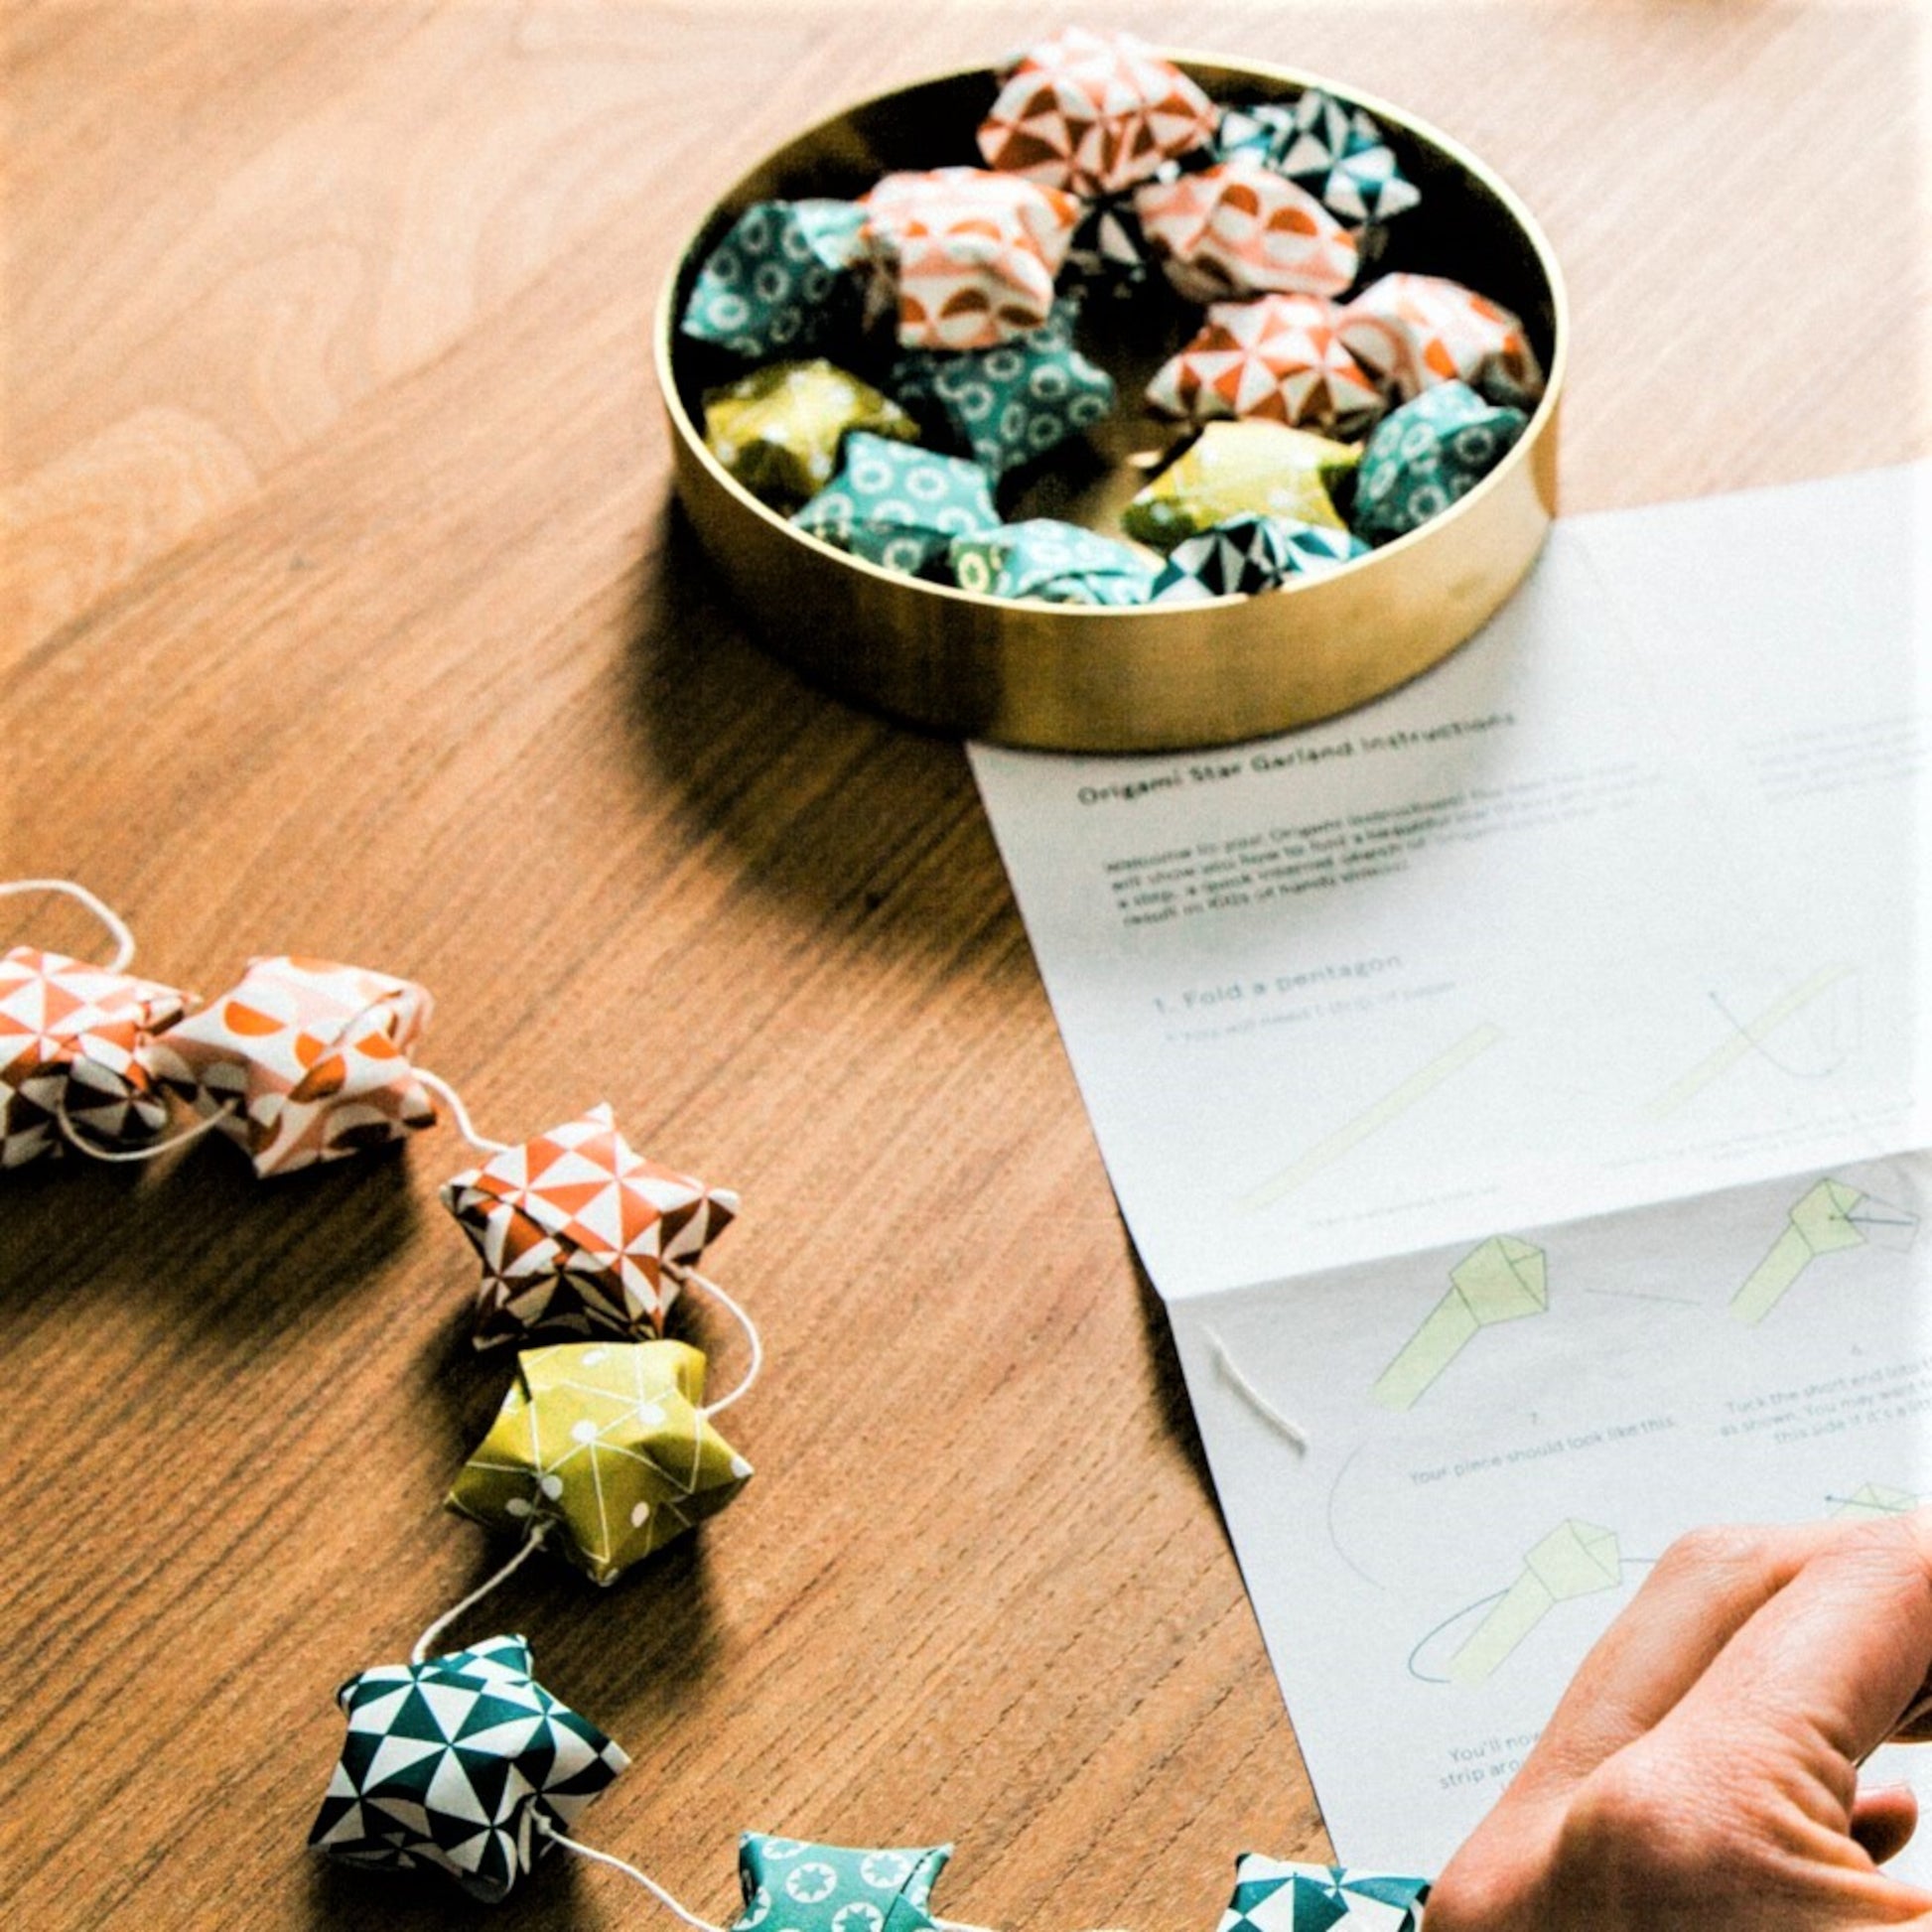 A garland of small paper origami patterned stars "lucky stars" in mustard, teal, aqua and orange, close up of the instructions